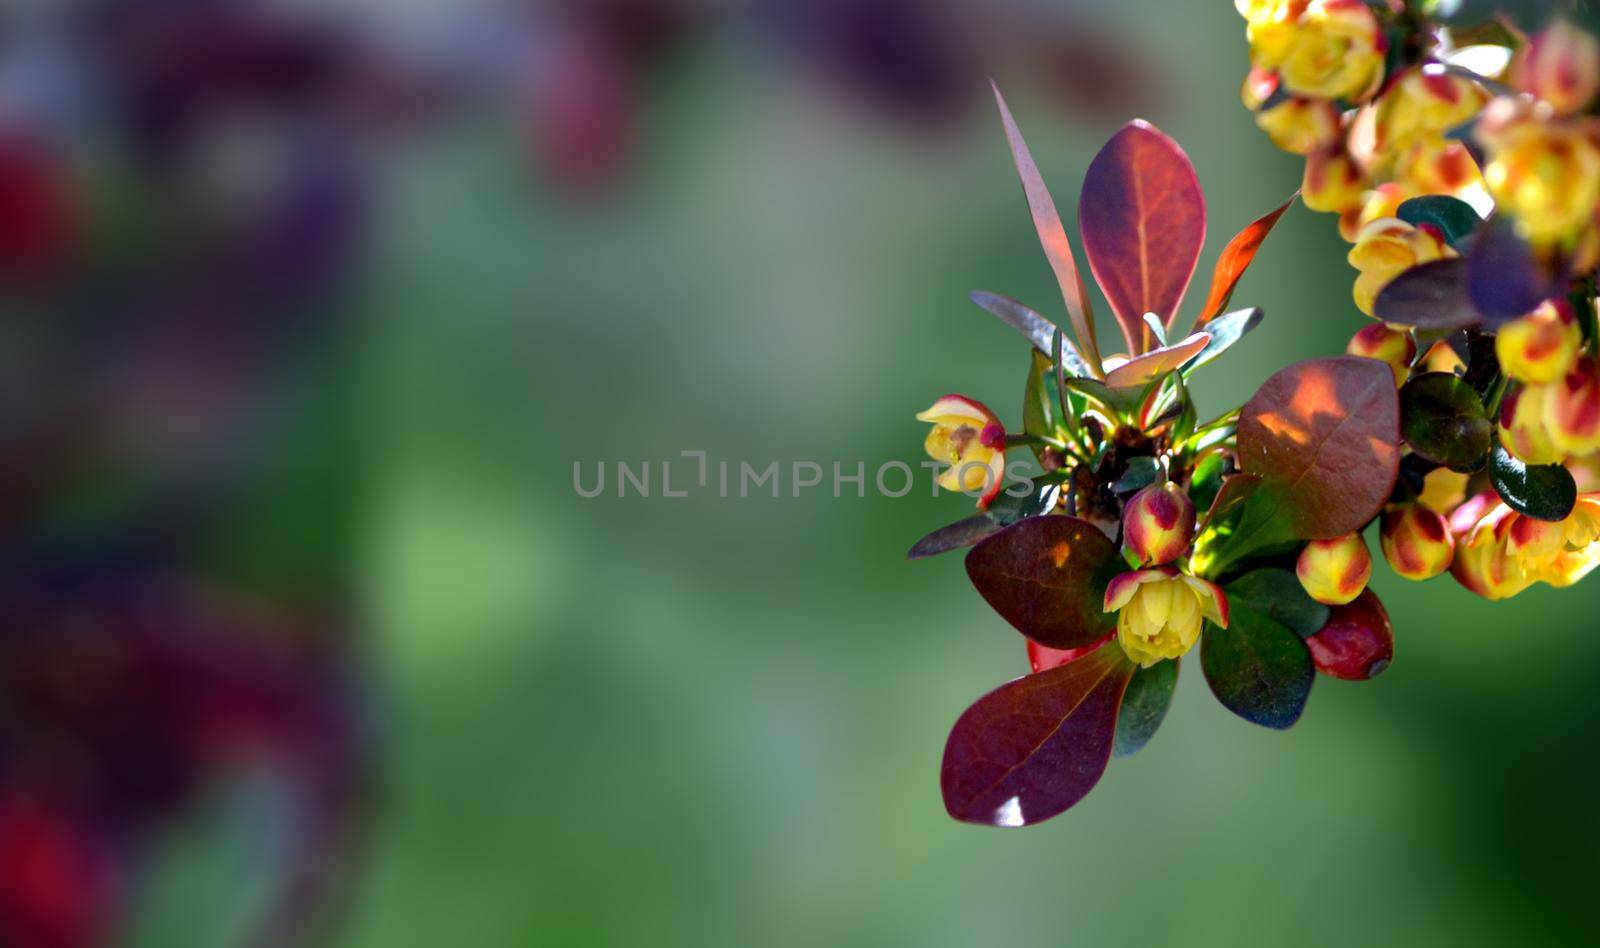 Macro inflorescences of barberry Berberis thunbergii with yellow flowersBeauty In Nature Growth Nature Flower of Berberis thunbergii Focus On Foreground. High quality photo